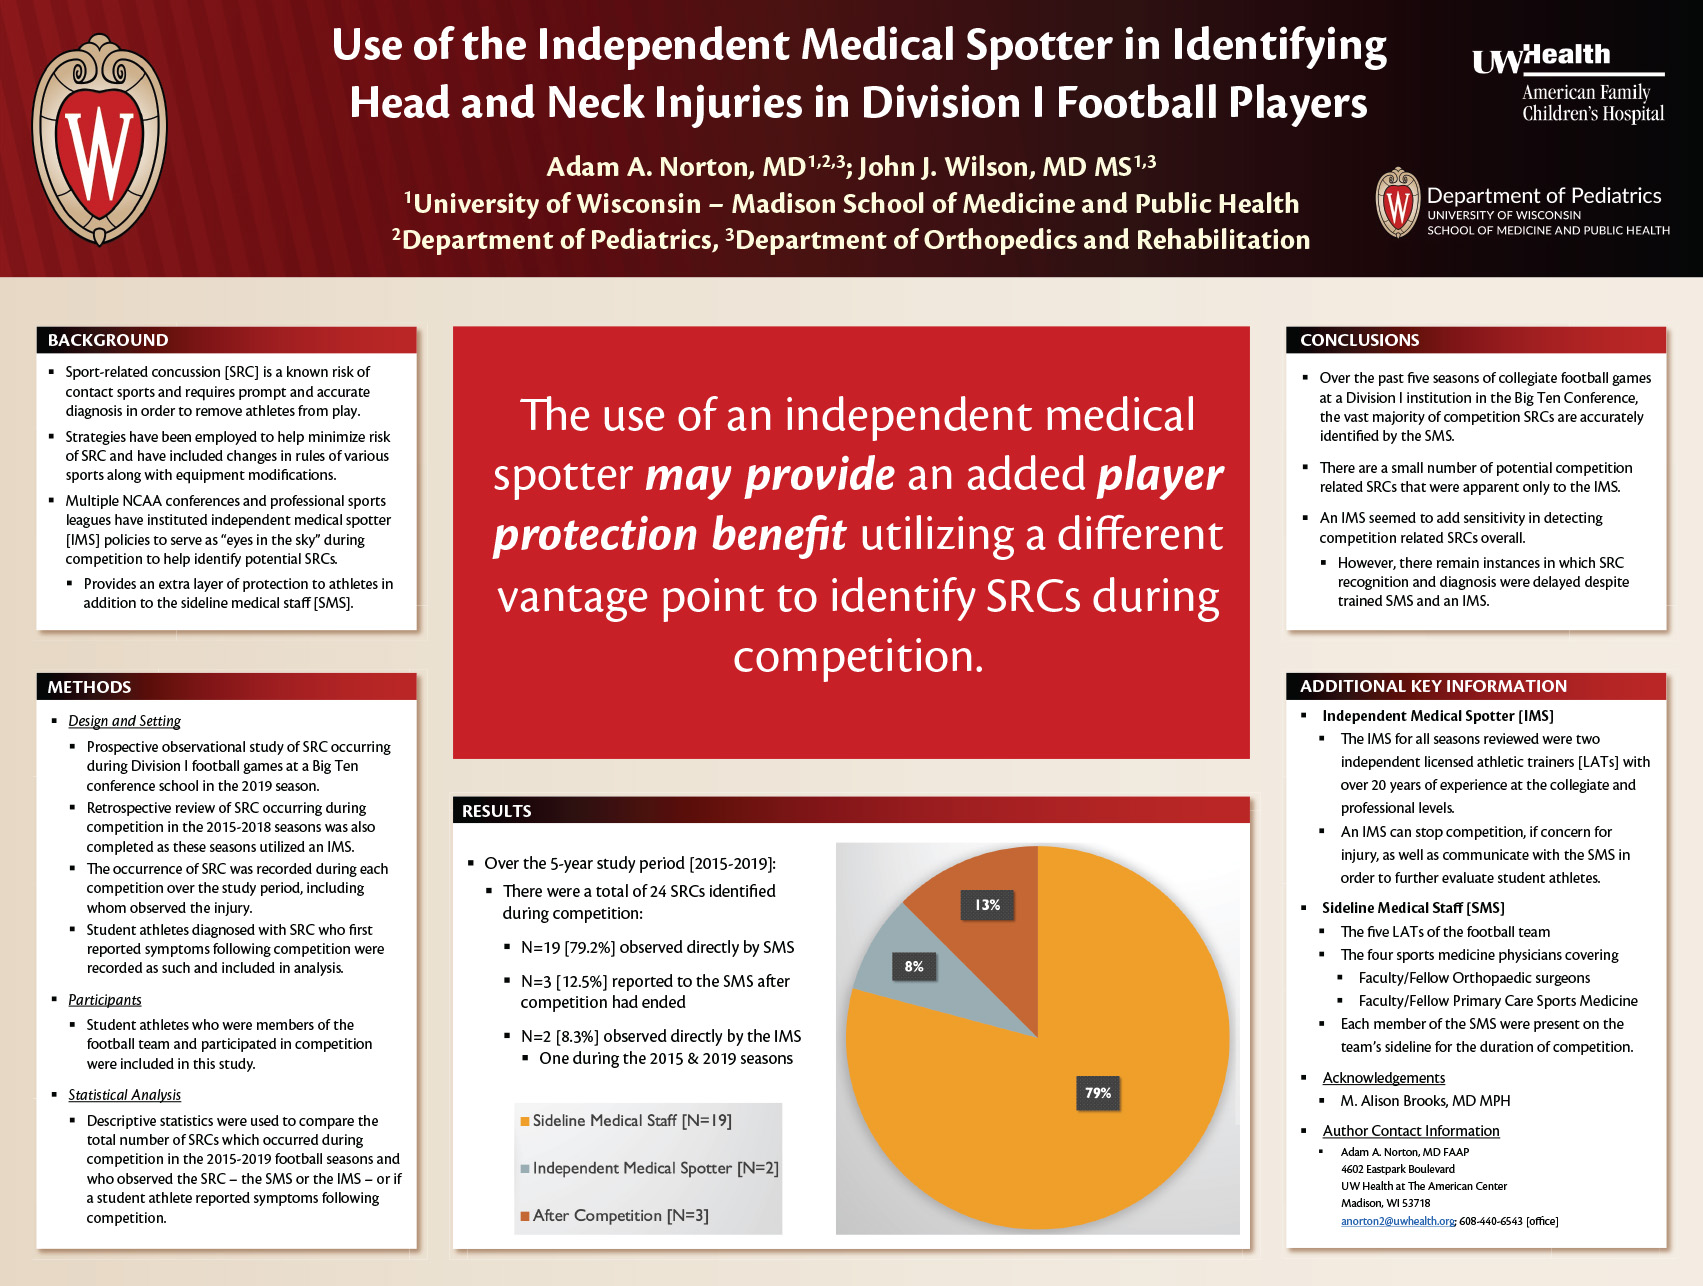 Use of the Independent Medical Spotter in Identifying Head/Neck Injuries in Division I Football Players poster image